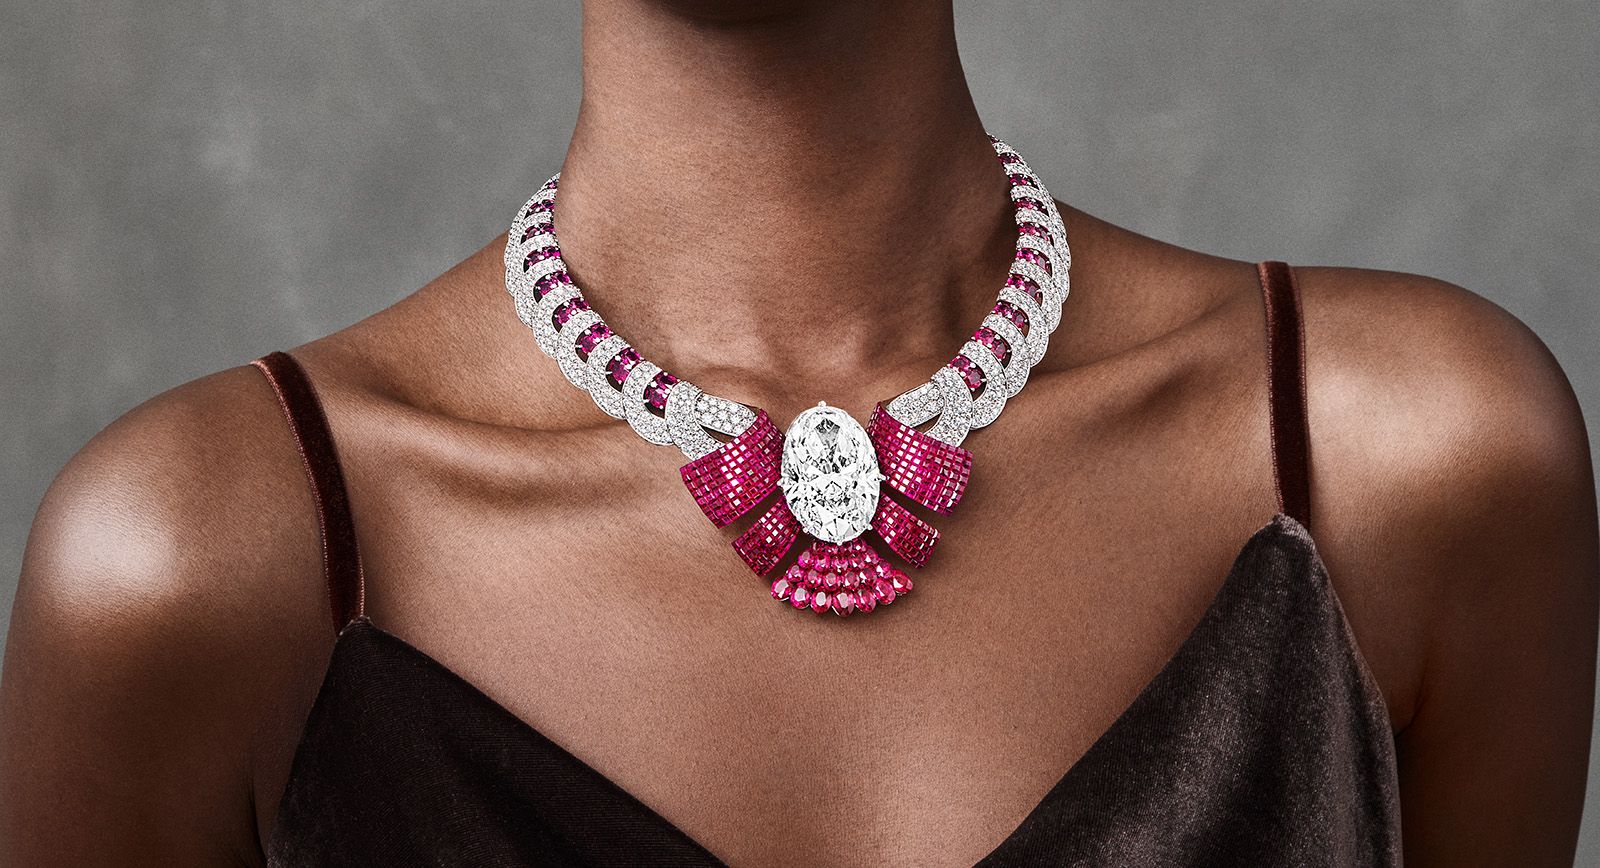 Van Cleef & Arpels Unveils Extraordinary Collection Carved from One Massive  Diamond - Galerie